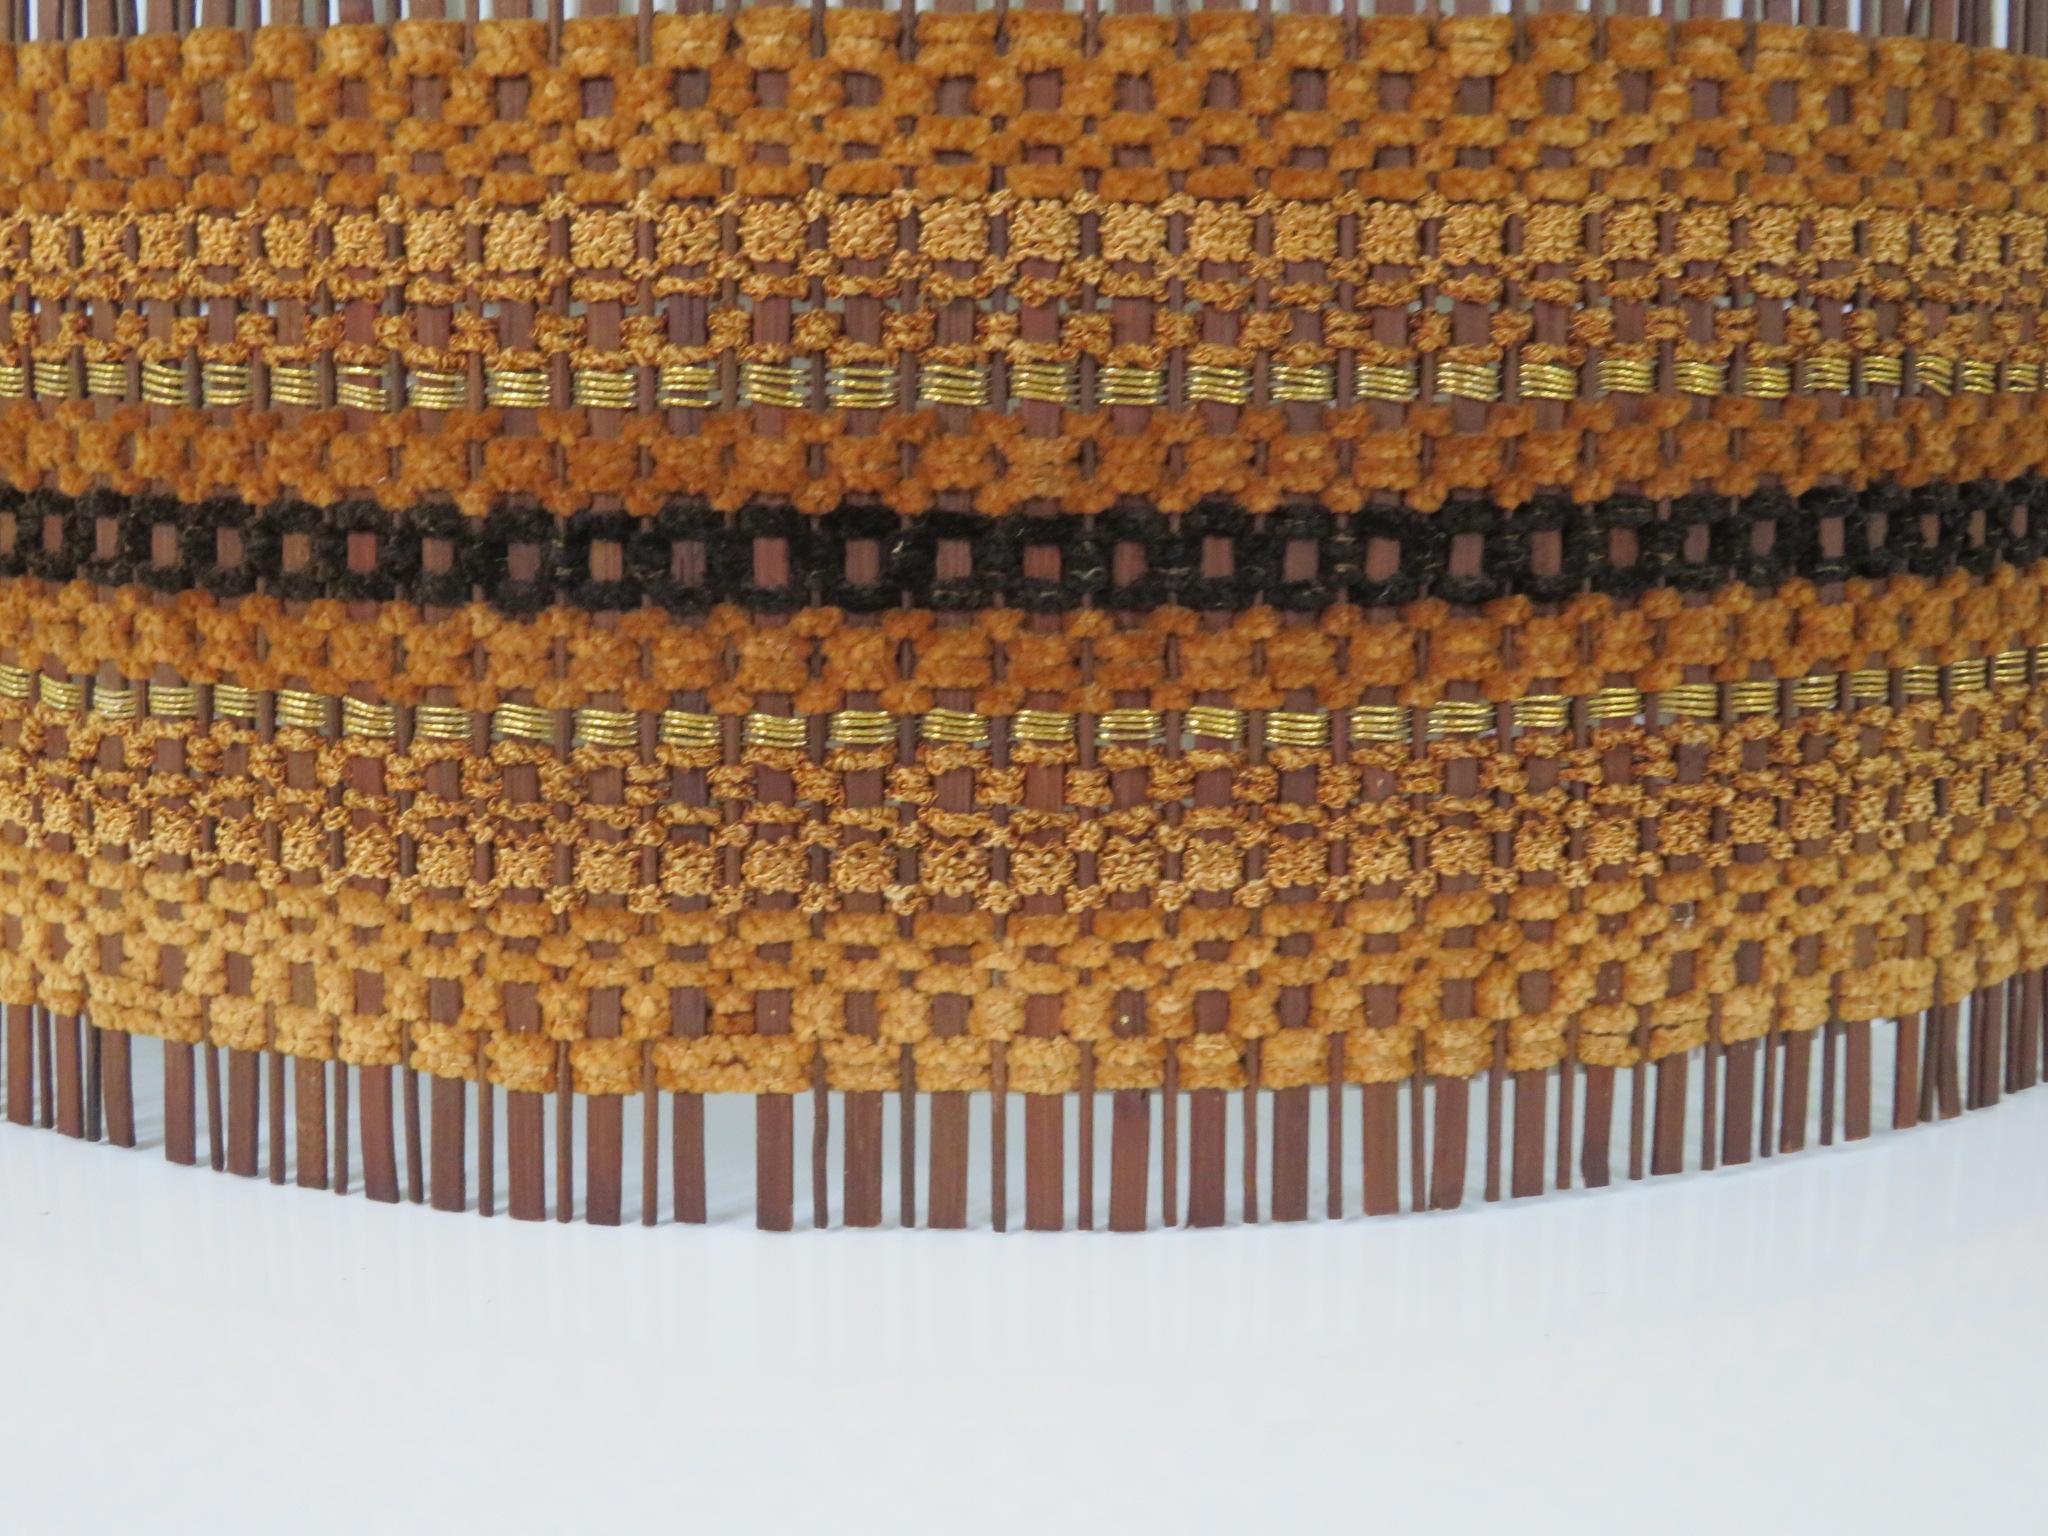 Hand-Woven Exquisite Woven Chenille & Wood Maria Kipp Lampshade, Restored